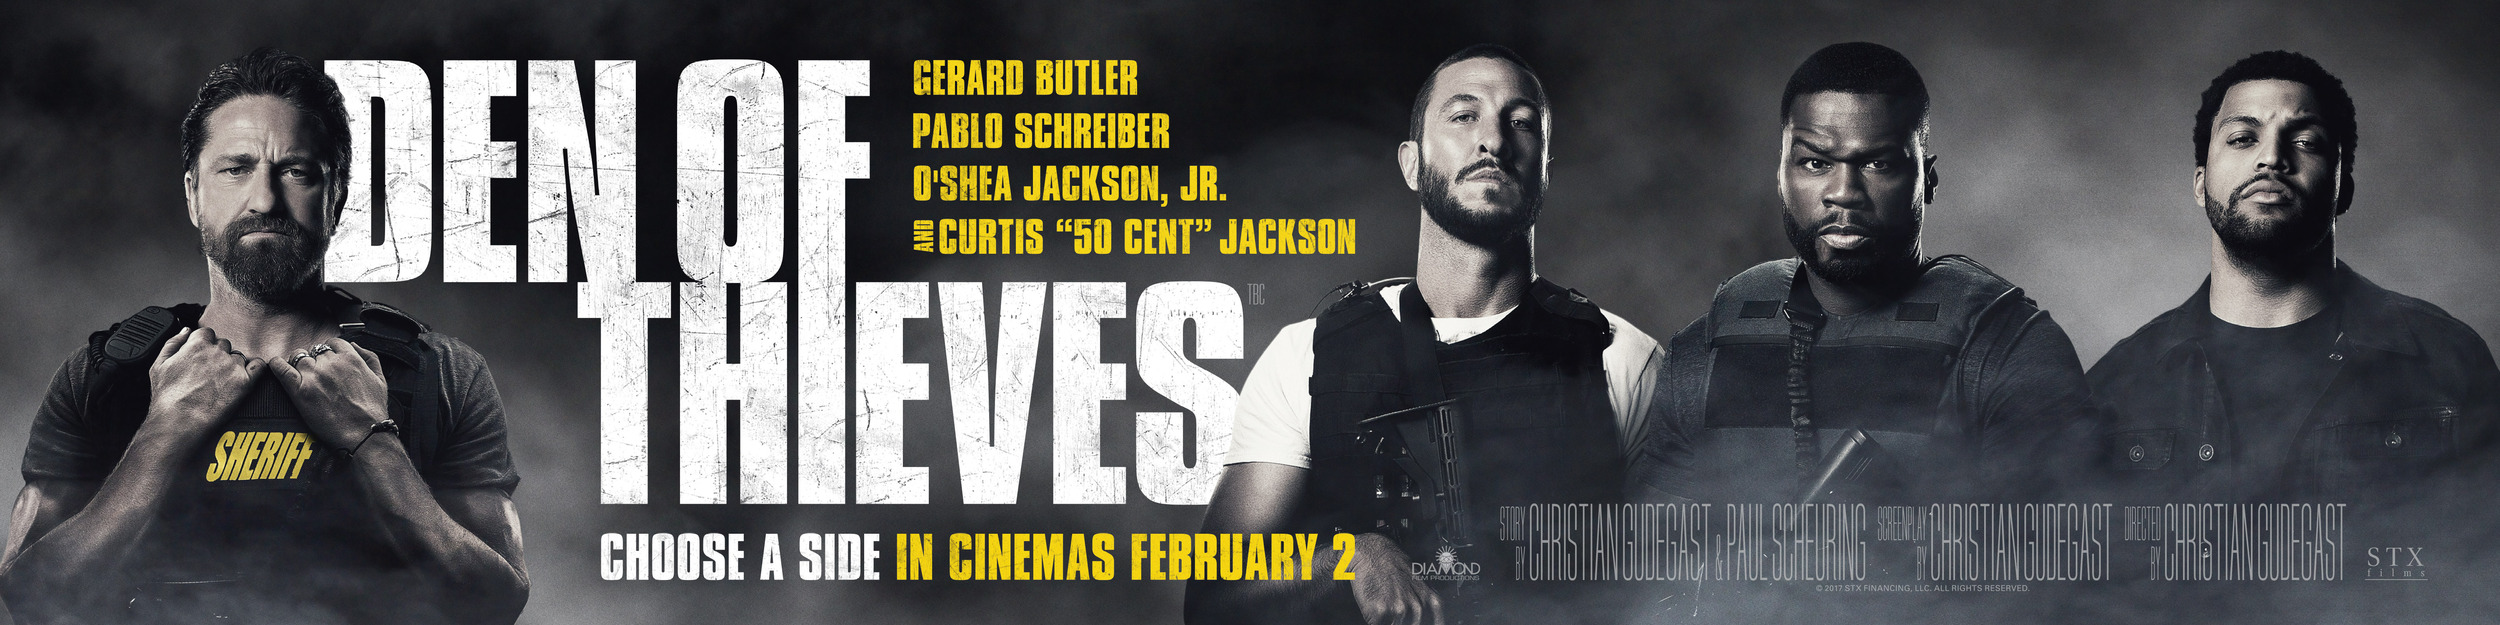 Mega Sized Movie Poster Image for Den of Thieves (#10 of 10)